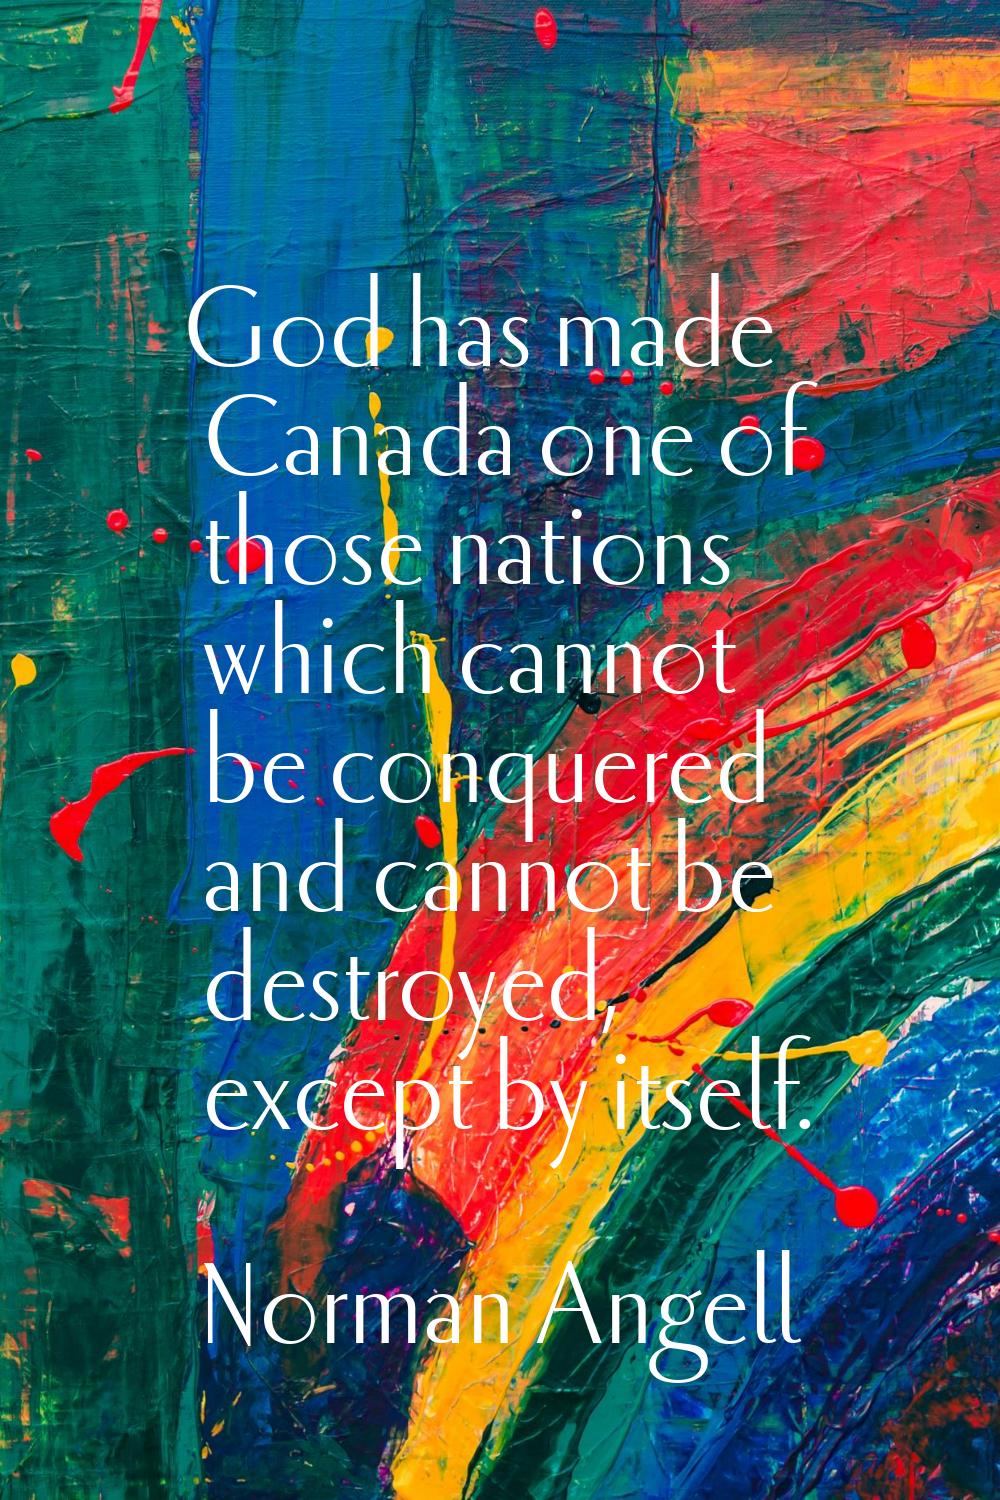 God has made Canada one of those nations which cannot be conquered and cannot be destroyed, except 